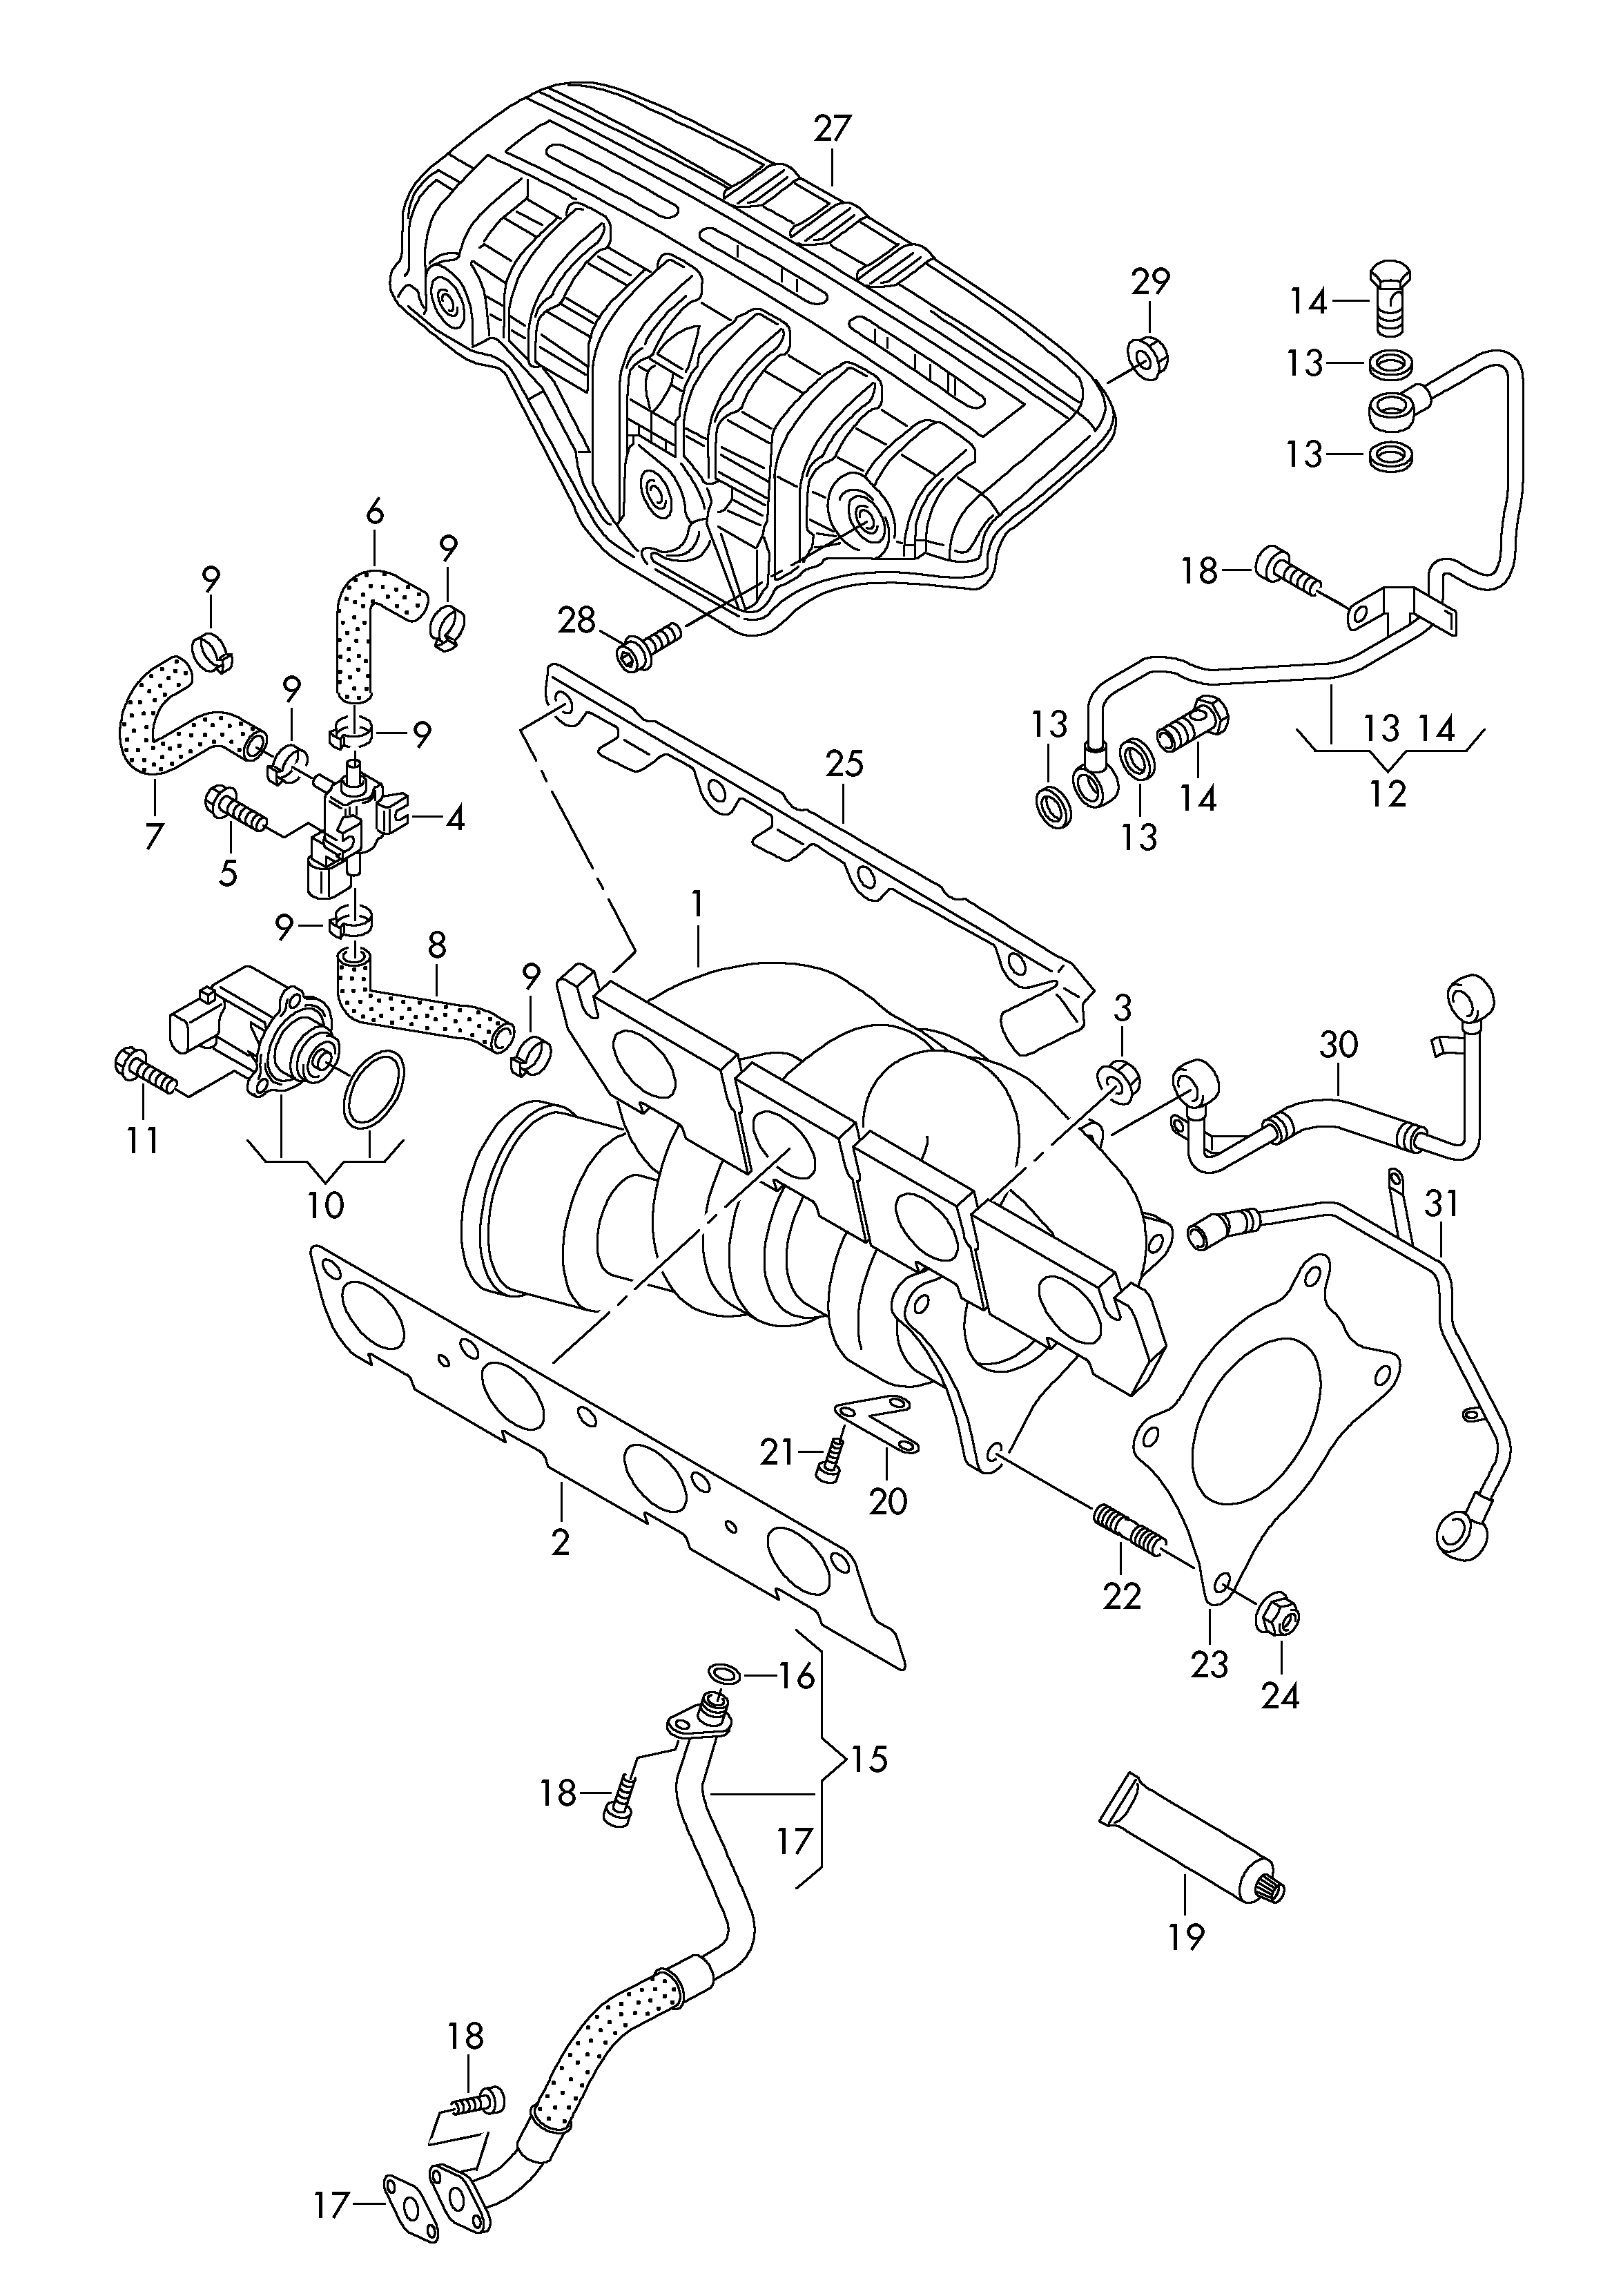 exhaust manifold with turbo-
charger - Touran(TOU)  